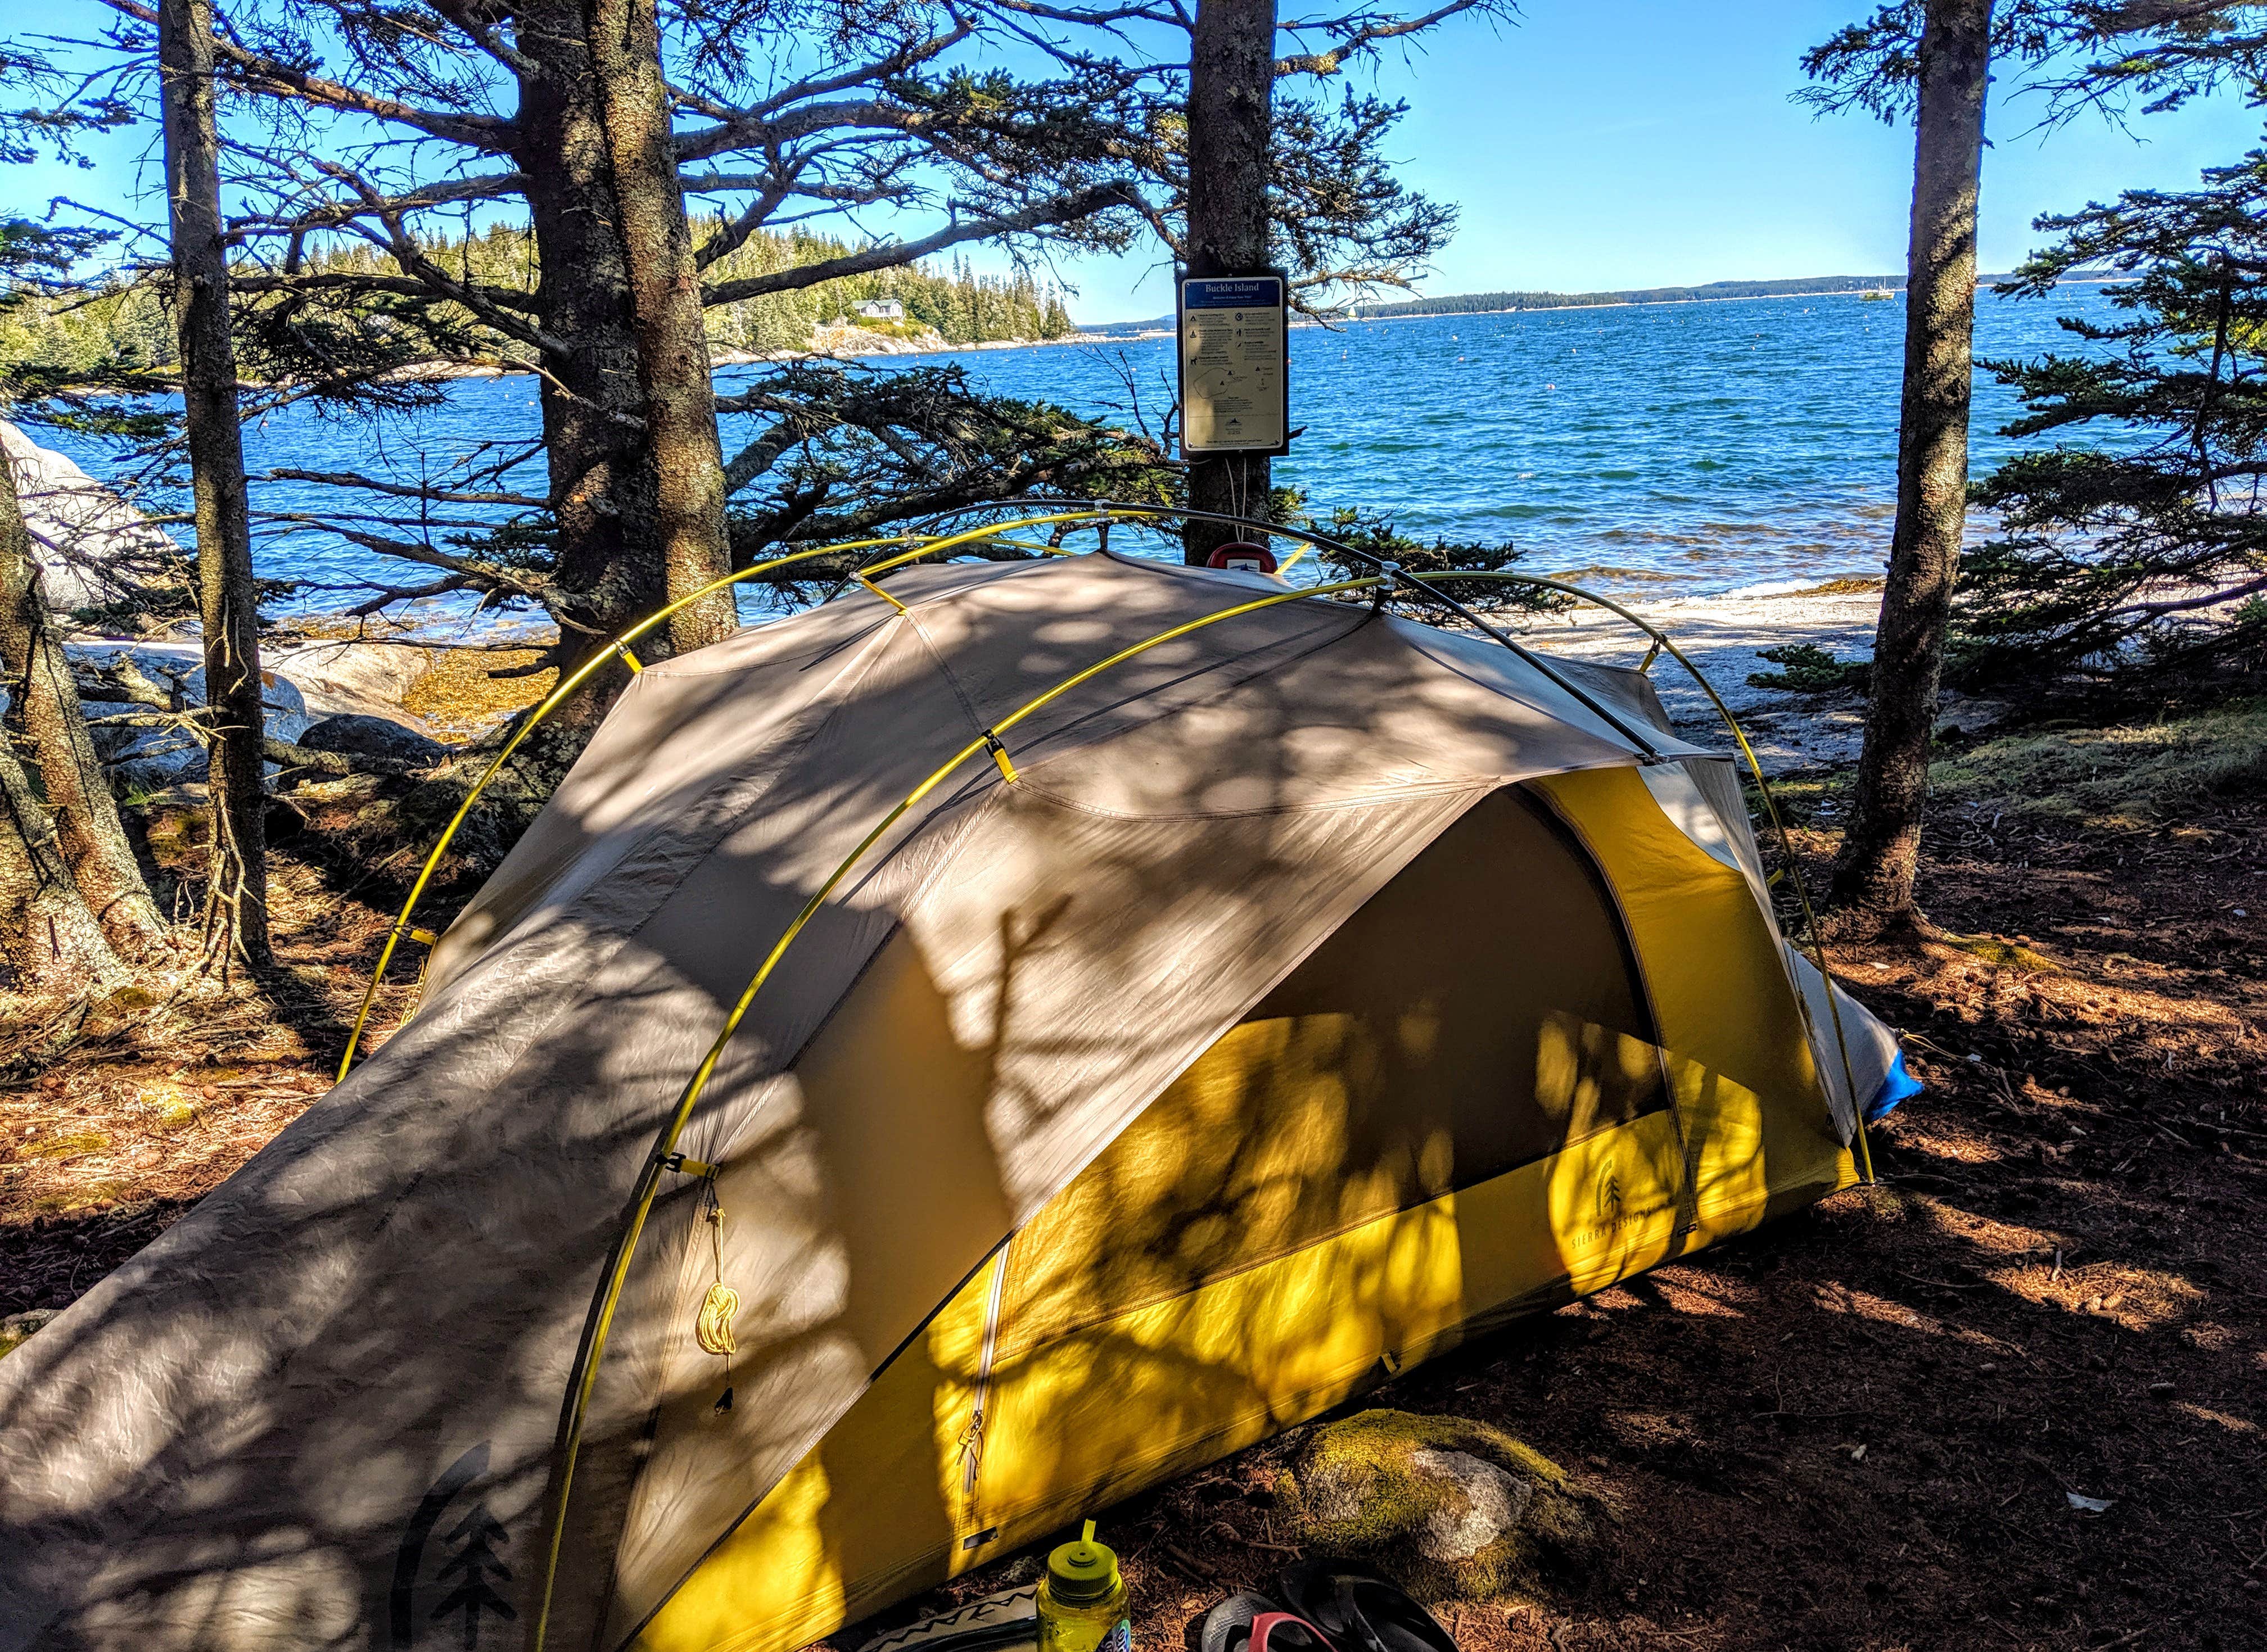 The tent site by the water is perfect for 1 tent.